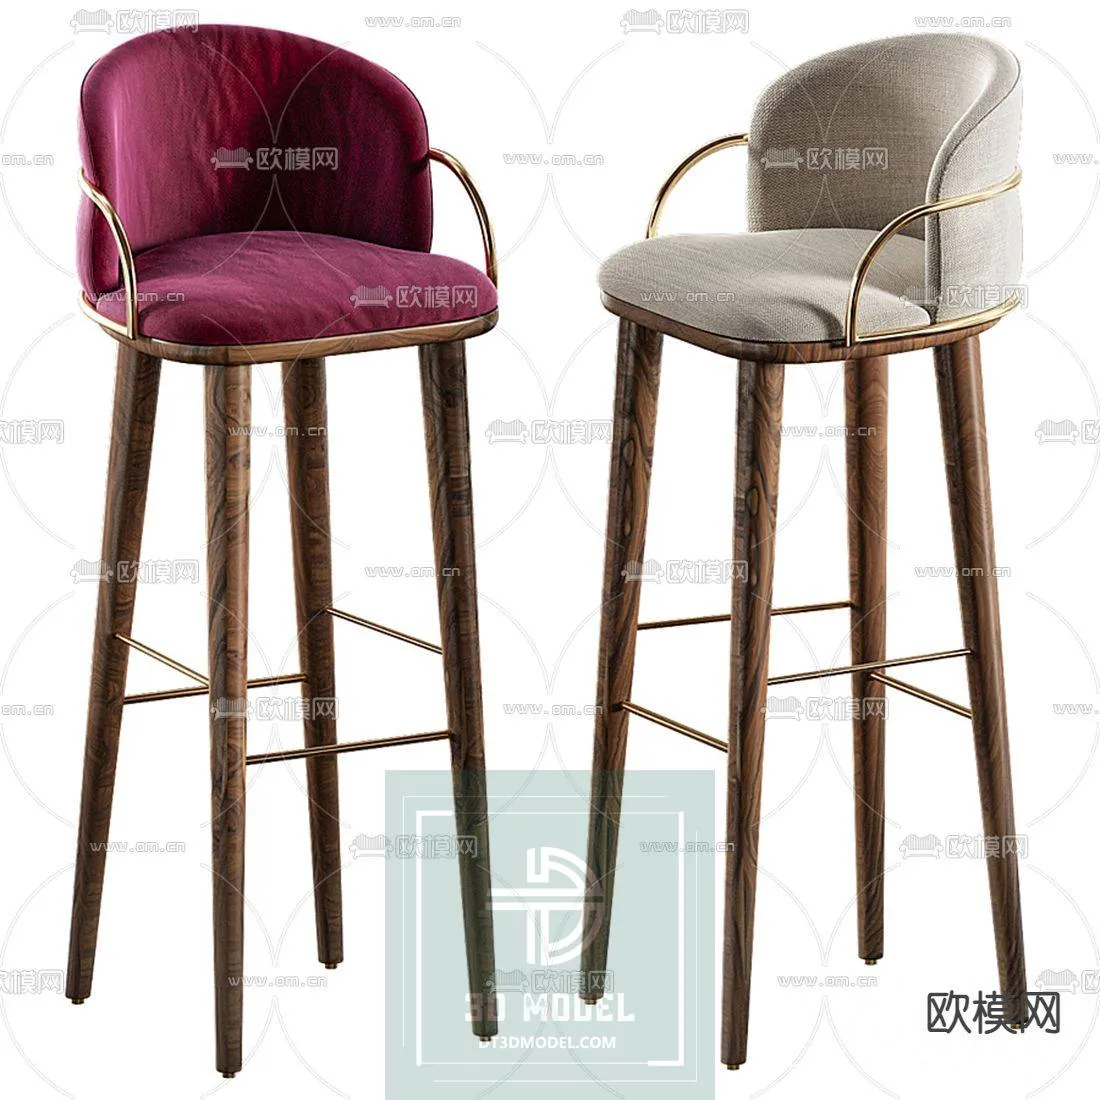 STOOL – BAR CHAIR – 3DS MAX – 017